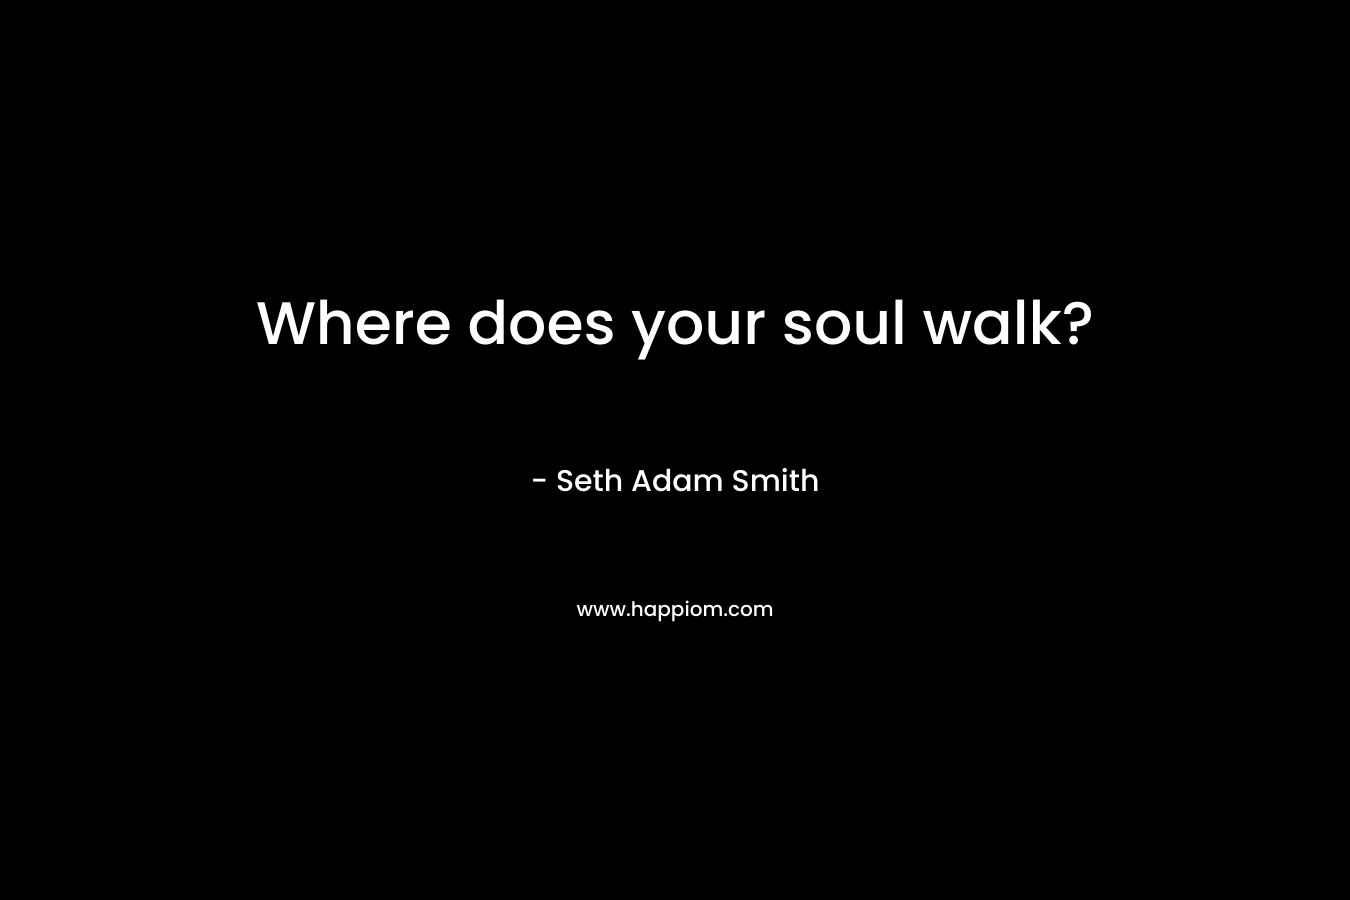 Where does your soul walk?